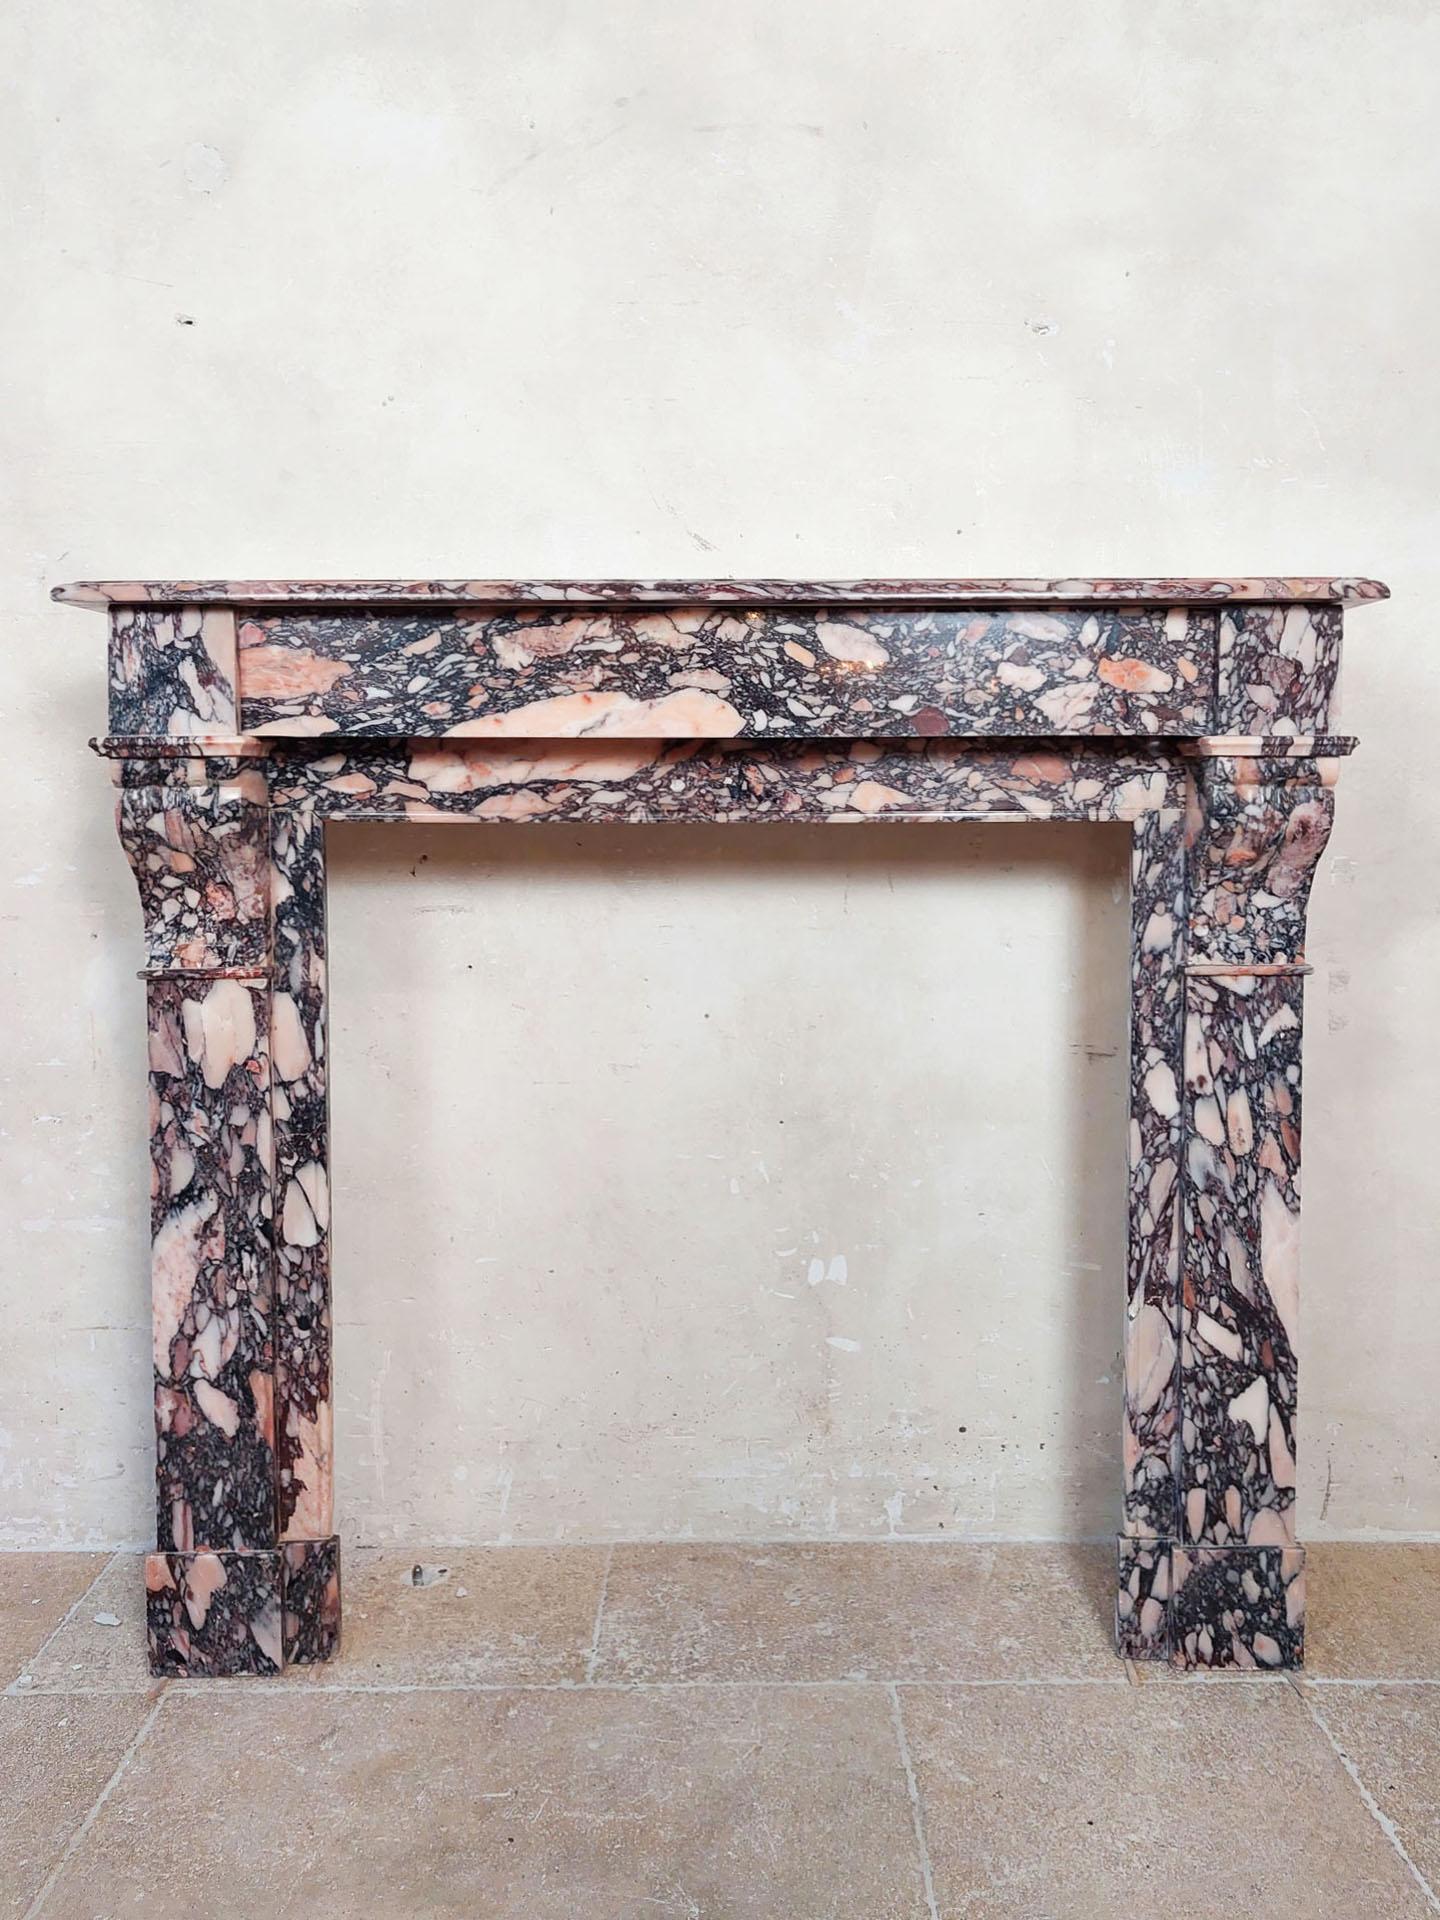 Sleek antique modillion mantelpiece made of breche violet marble. An exclusive marble in pink and violet tones that was usually used for much richer mantelpieces or objects because it is traditionally one of the more valuable types of marble. A